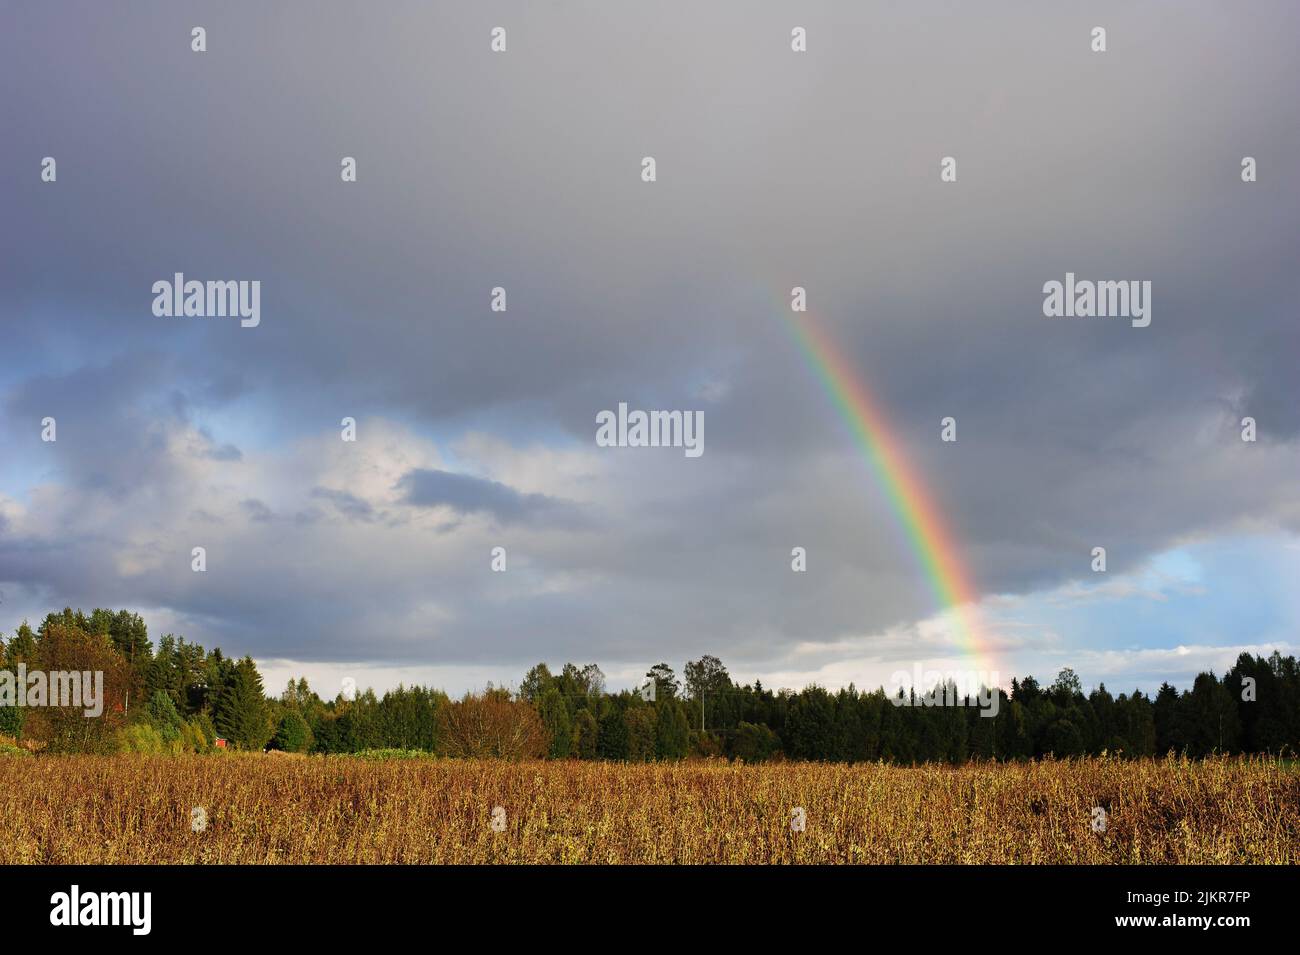 Rainbow over the rural landscape, dramatic sky and clouds, Finland. Stock Photo